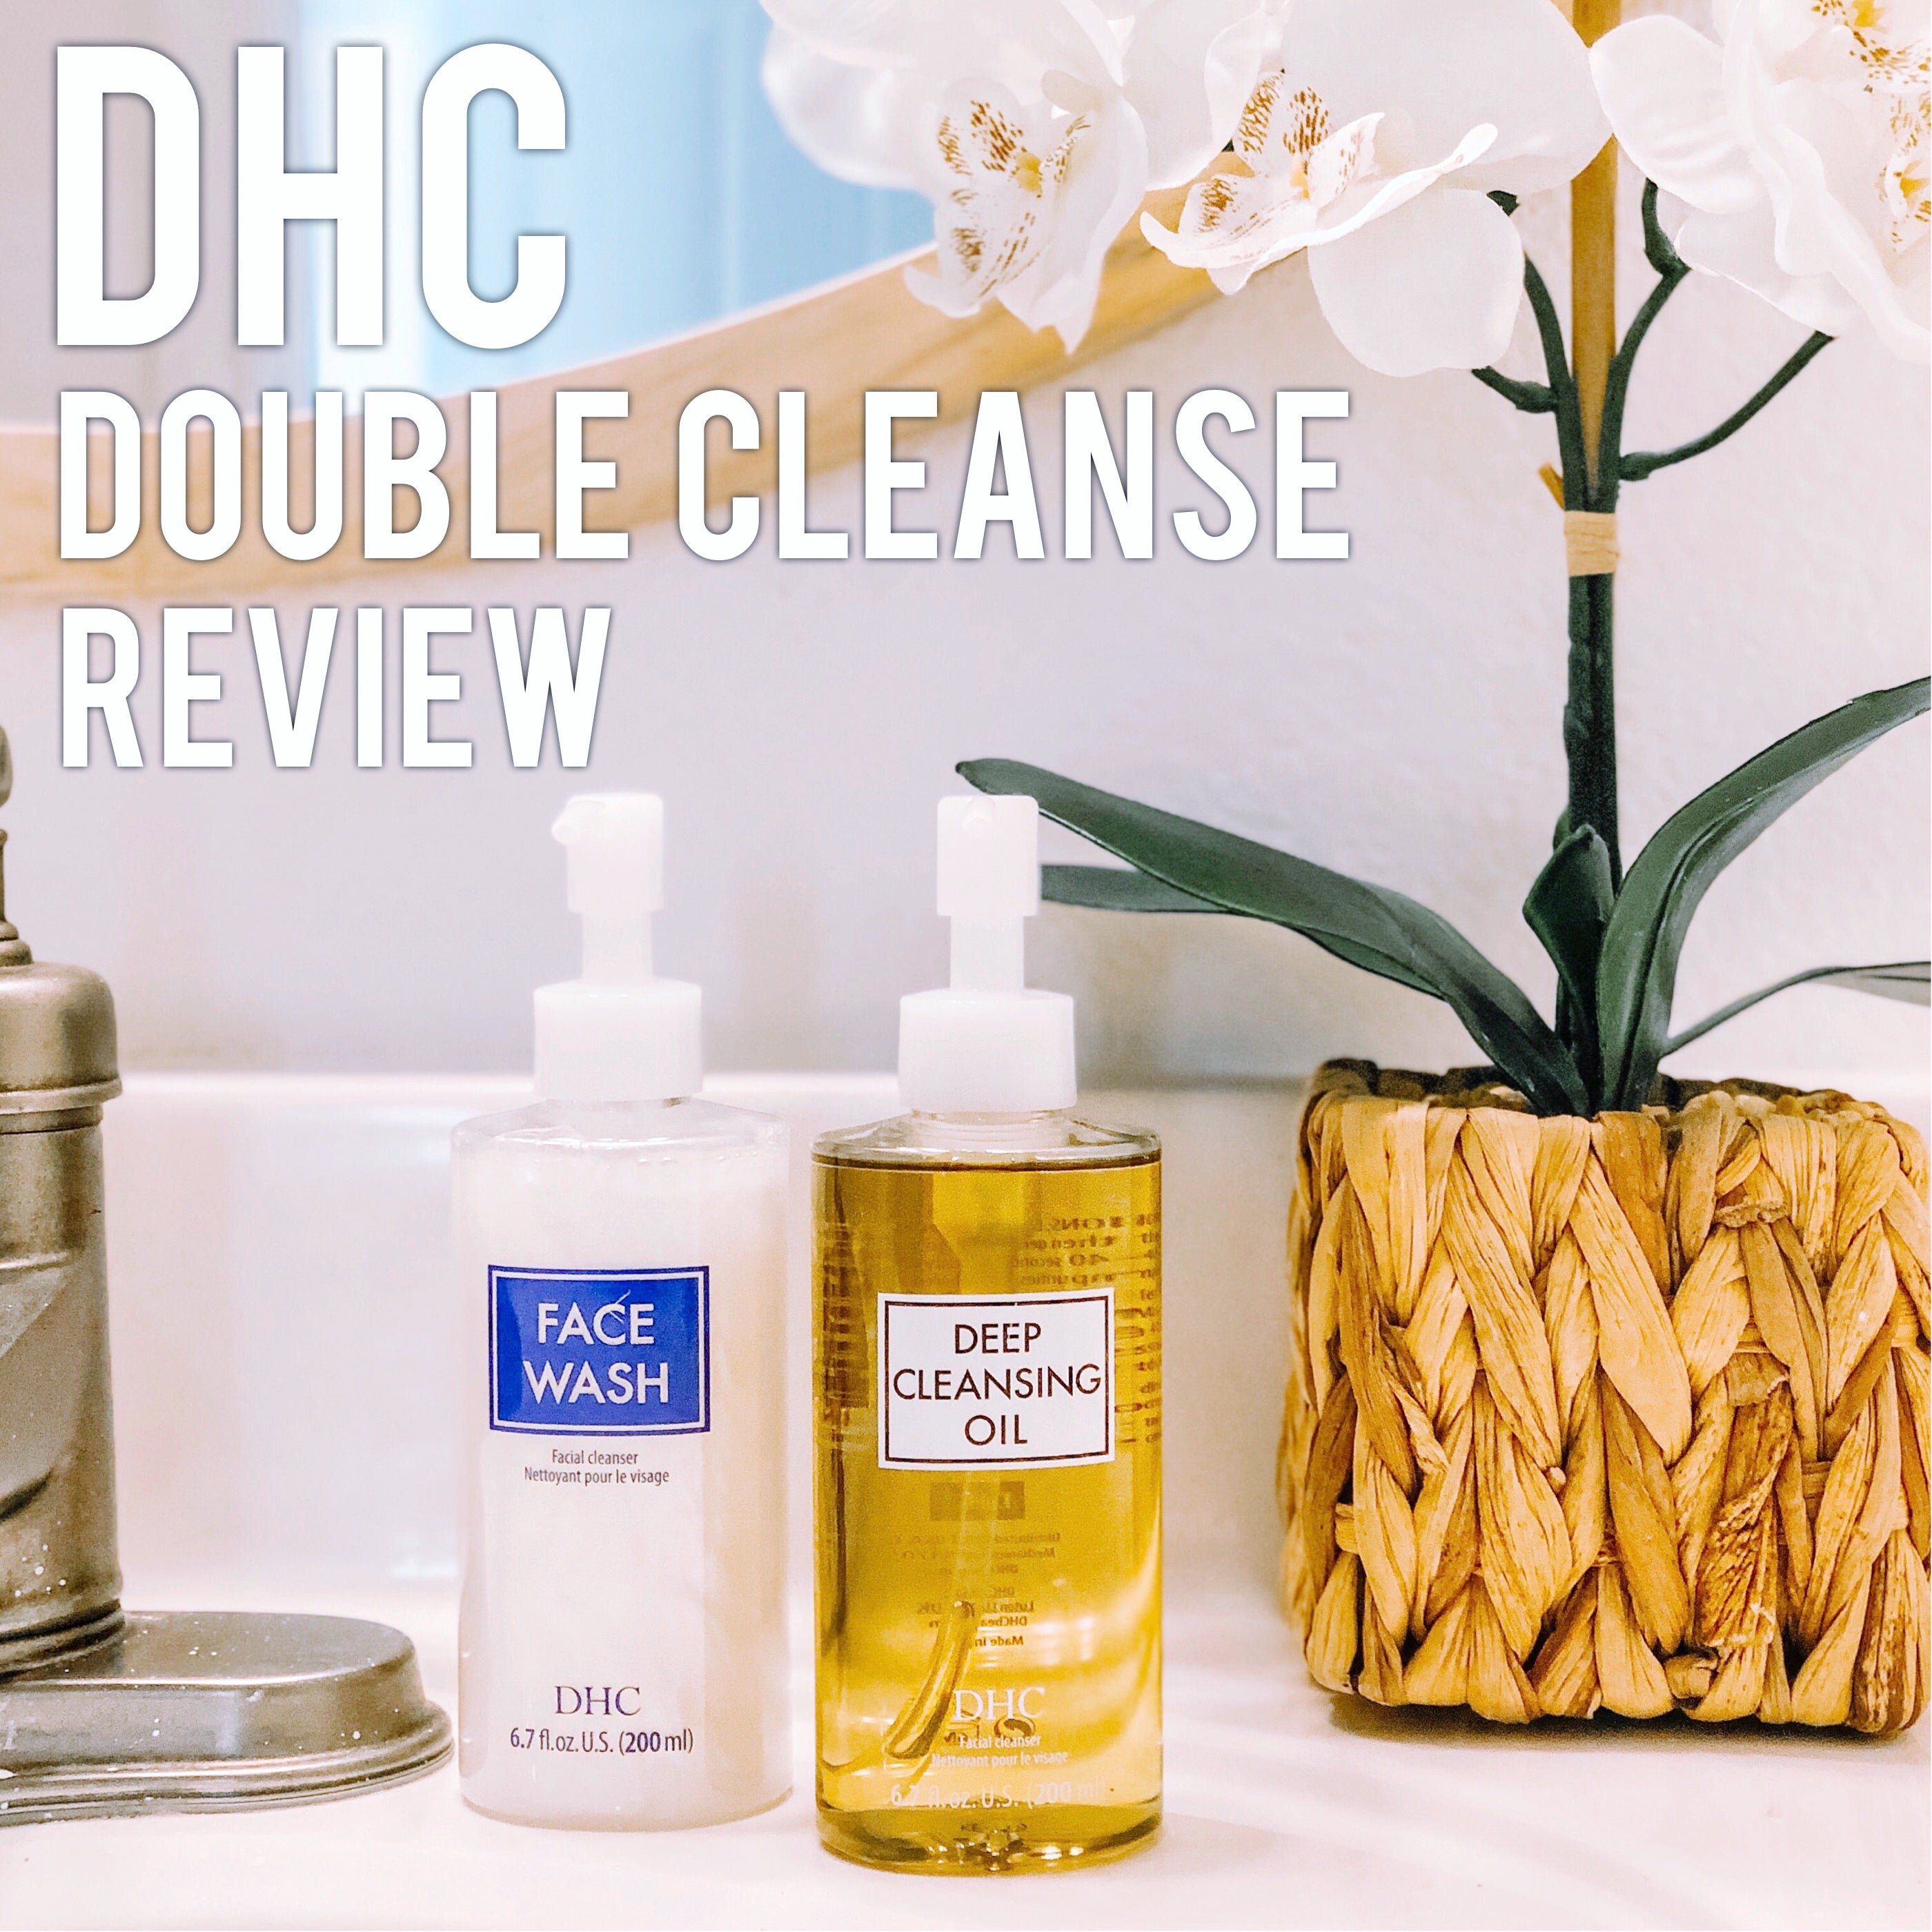 DHC Double Cleanse Review